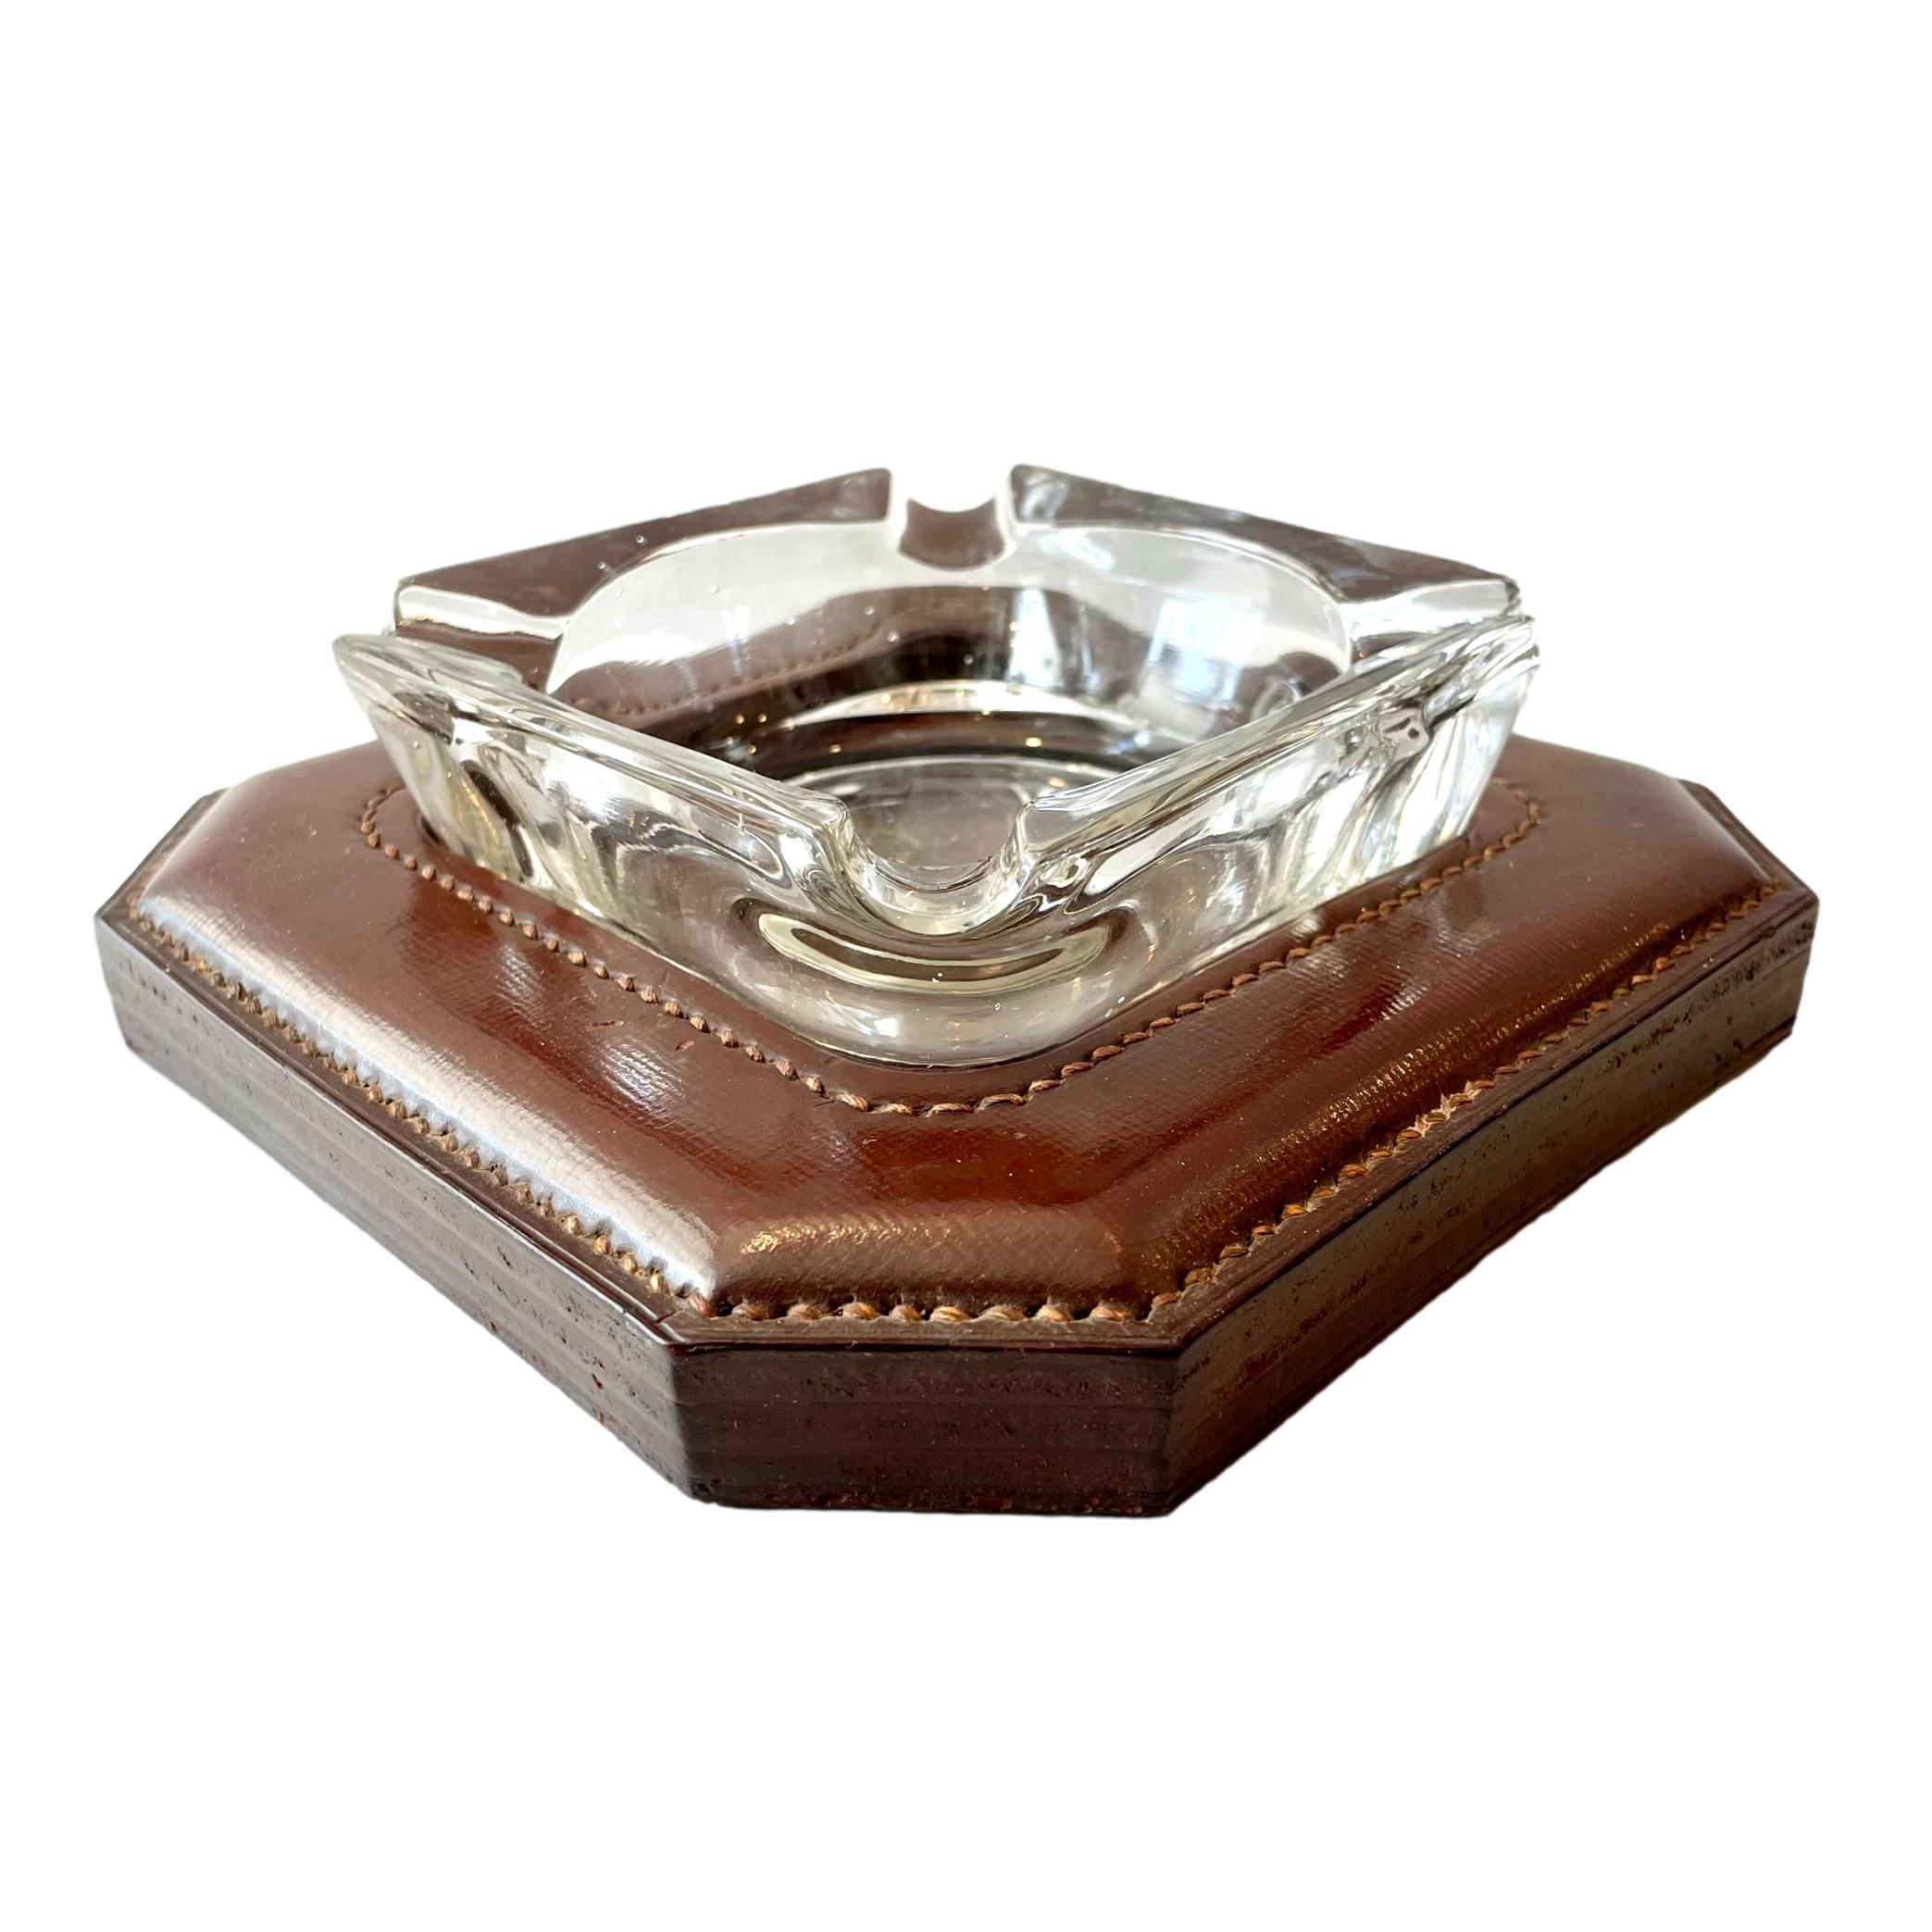 Jacques Adnet Cognac Leather and Glass Ashtray, 1950s France For Sale